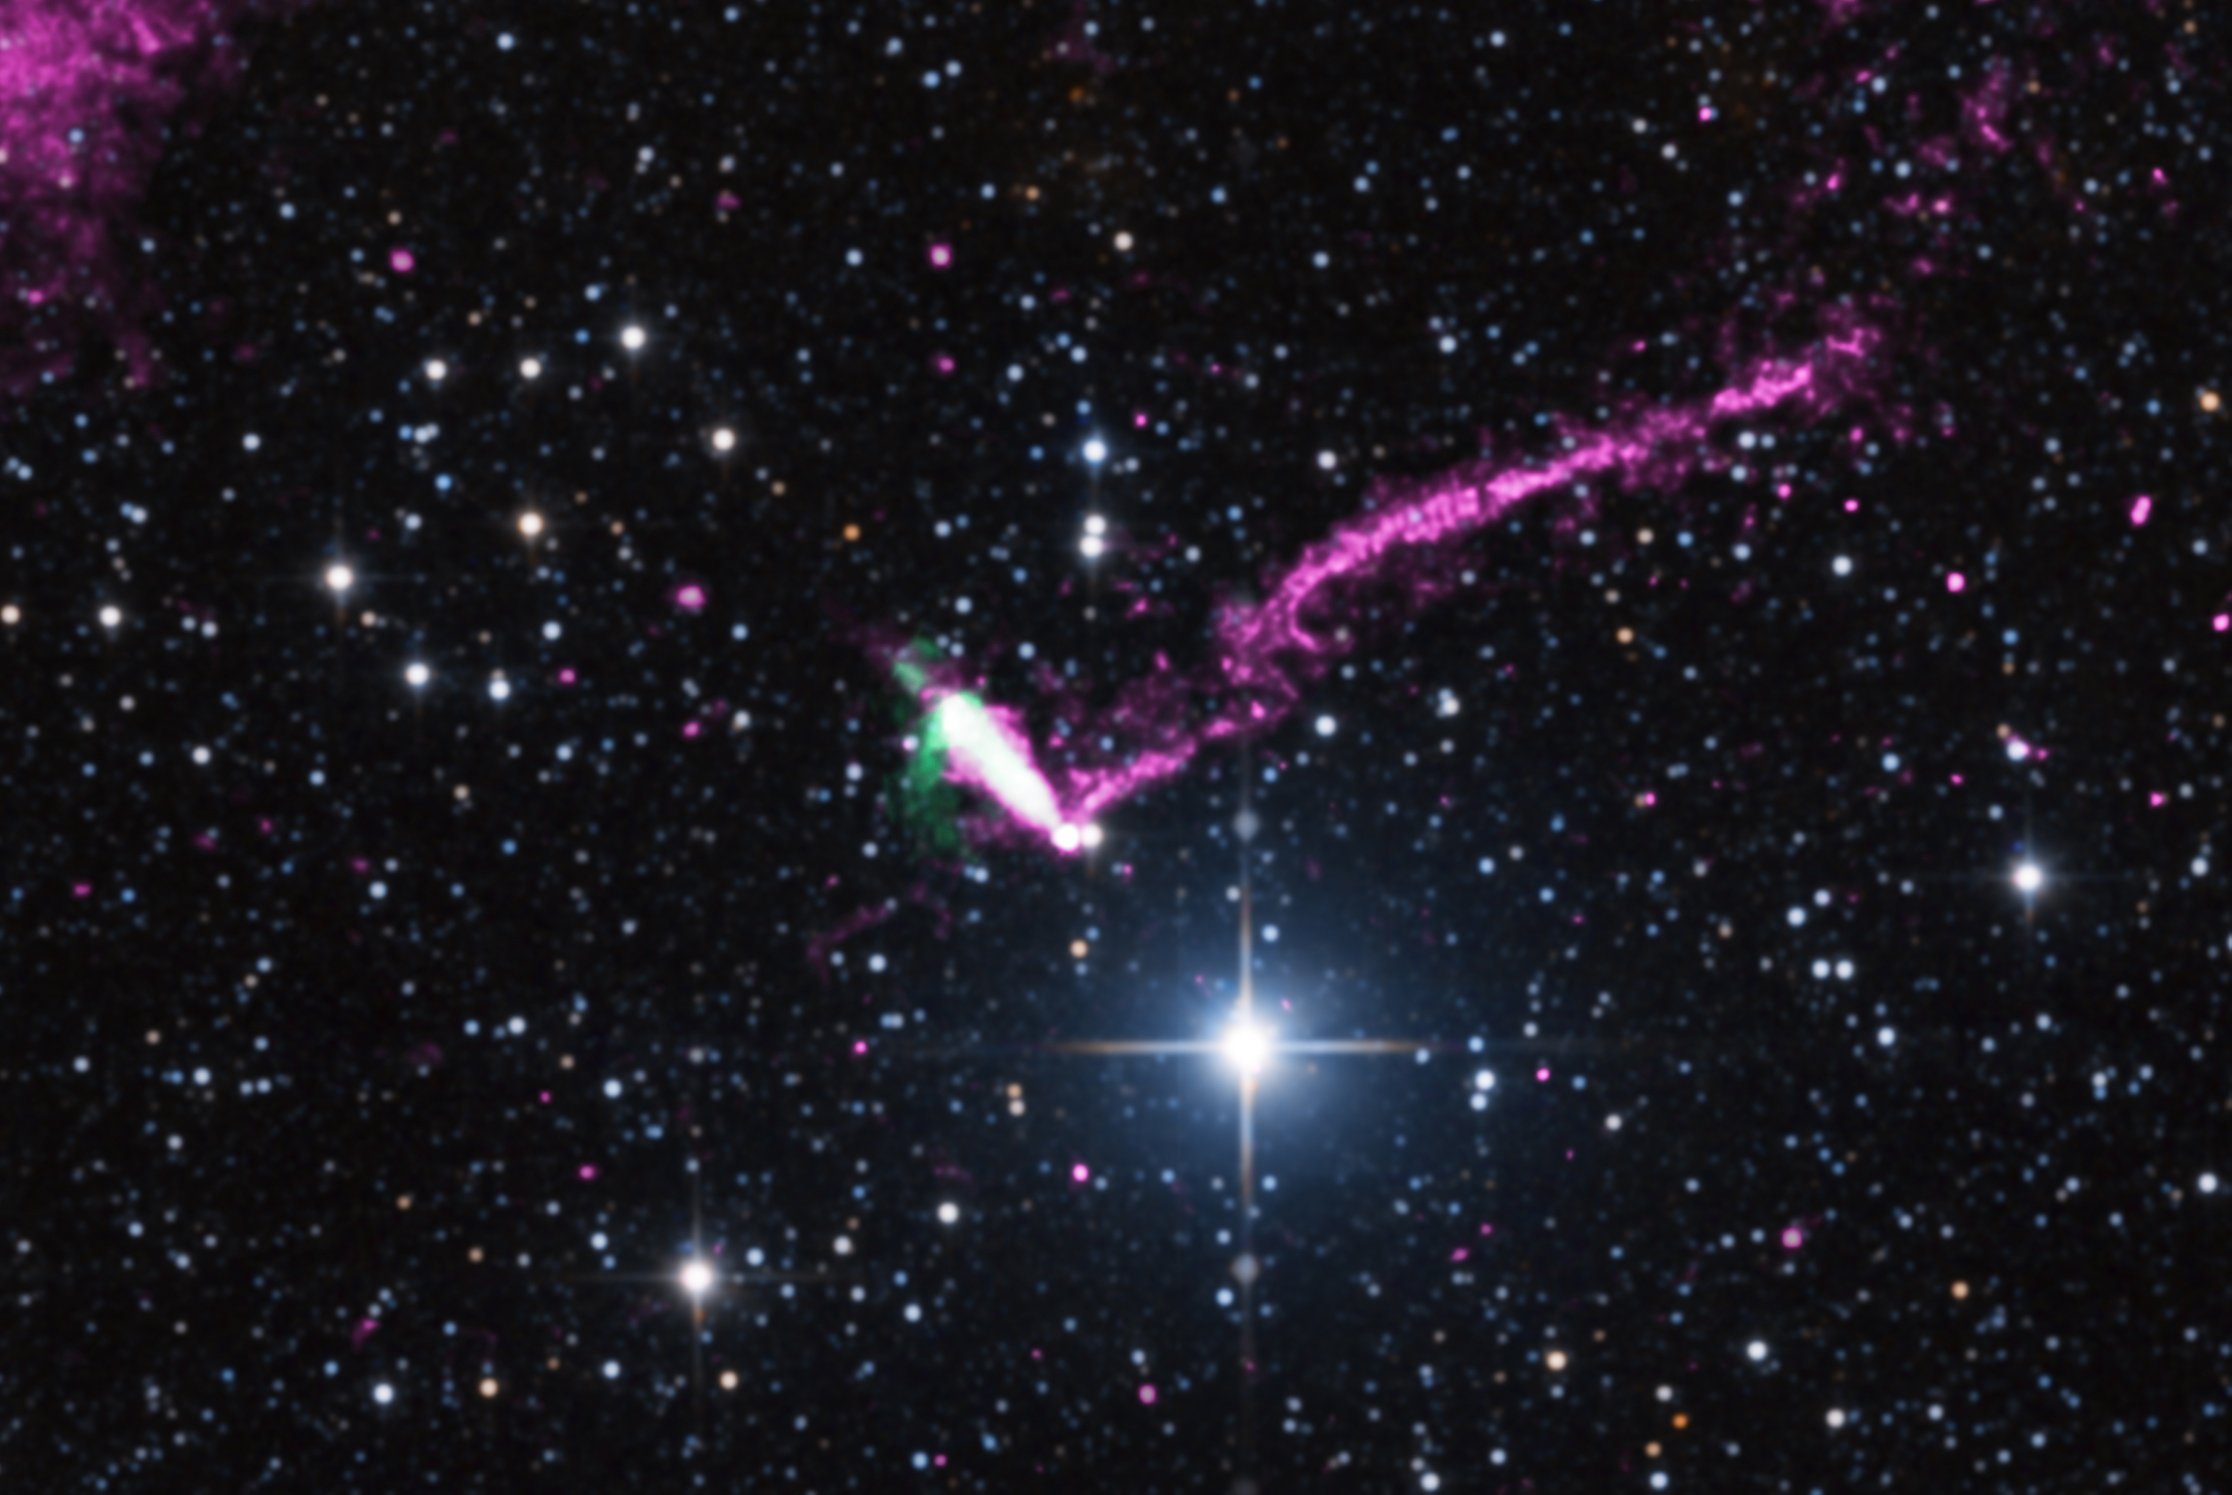 A pulsar moving at supersonic speeds about 23,000 light years from Earth.